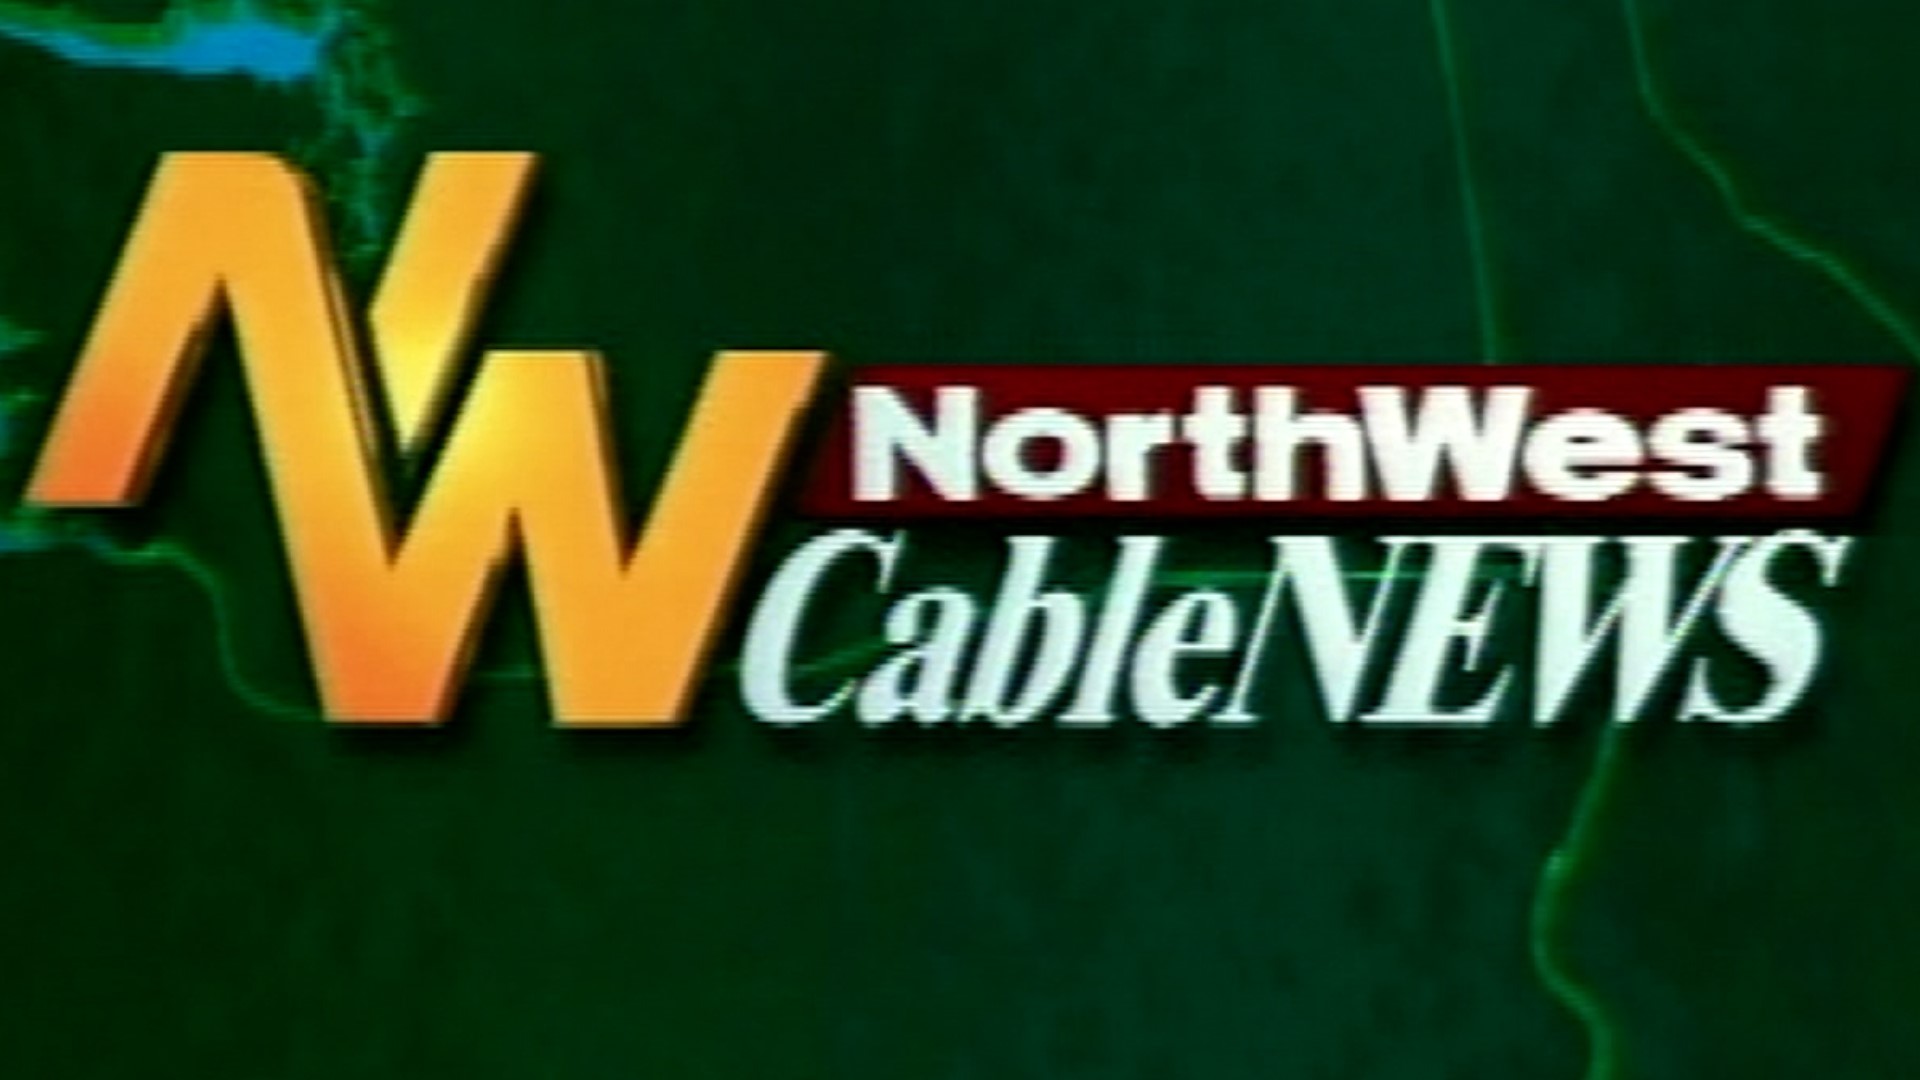 A look back at Northwest Cable News, a regional cable news network that brought together stations from Seattle, Spokane, Portland and Boise